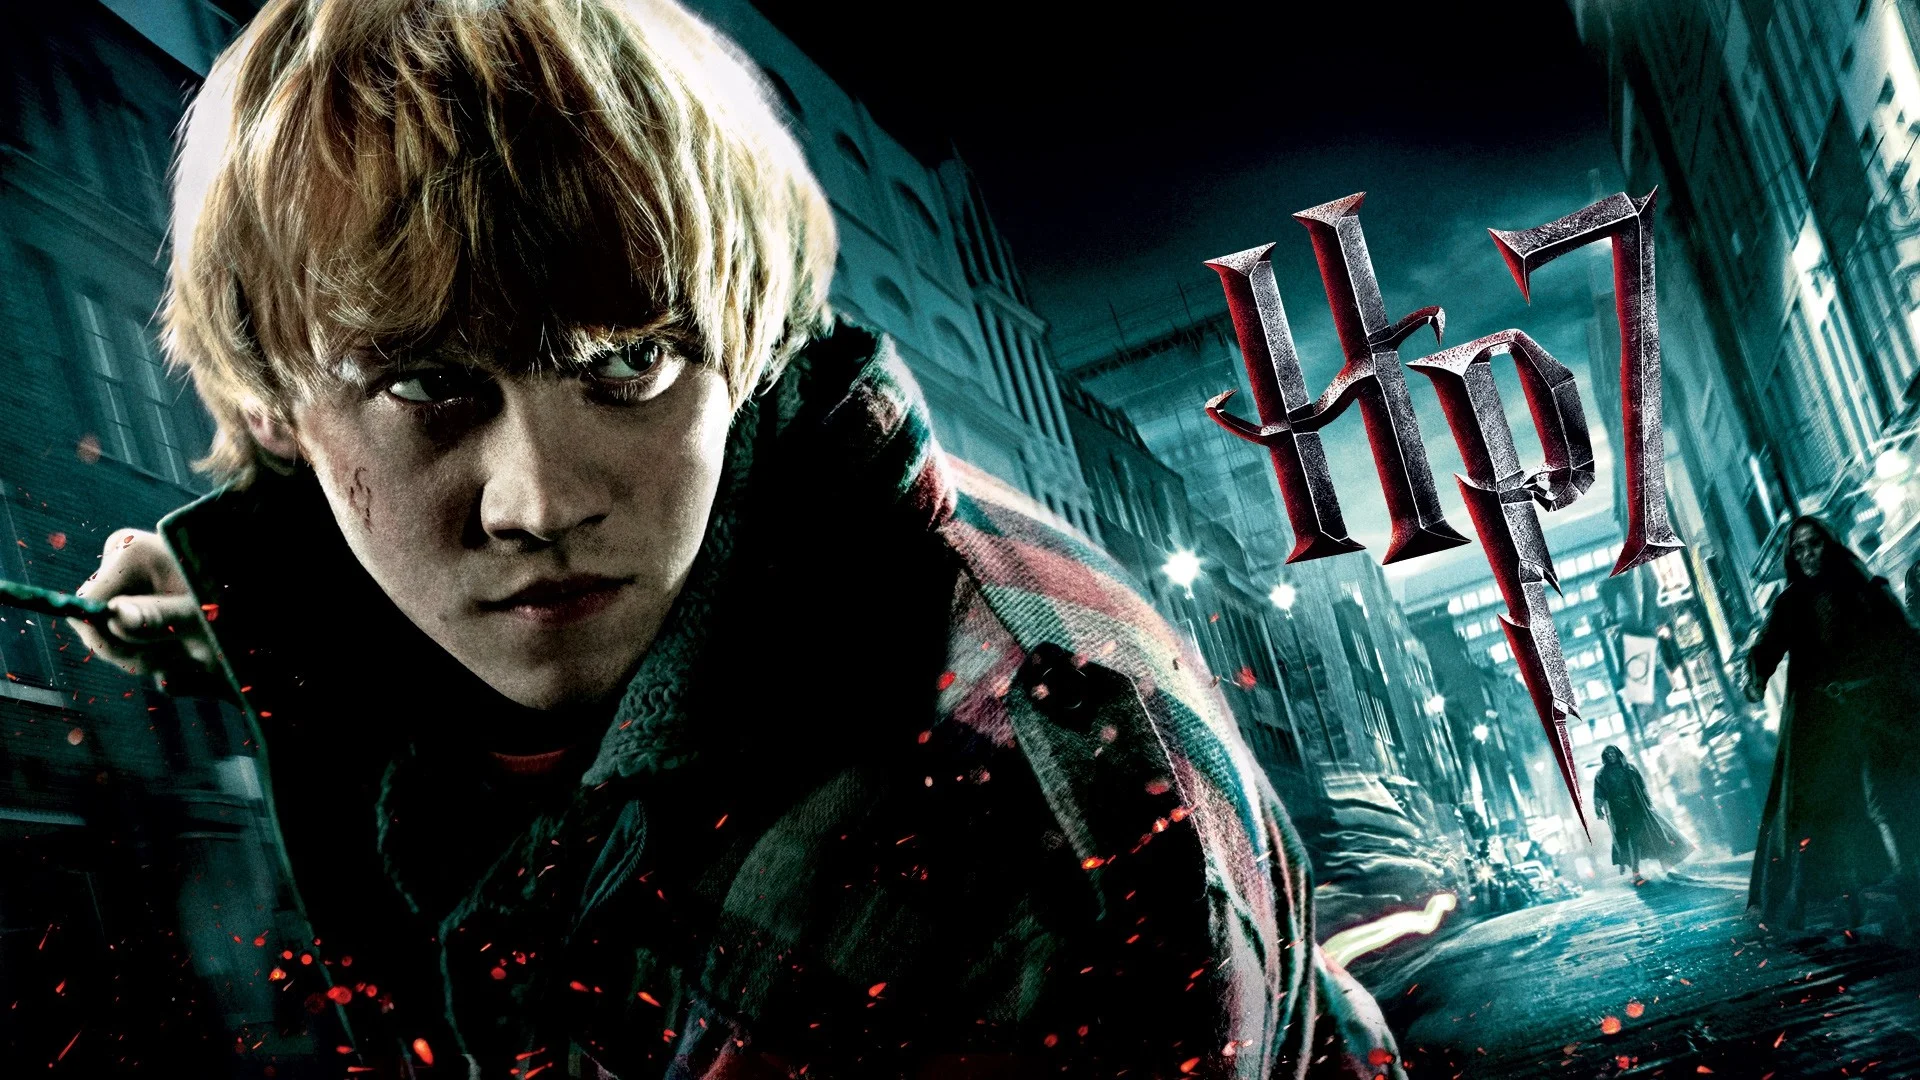 Wallpaper harry potter and the deathly hallows, ron weasley,  rupert grint